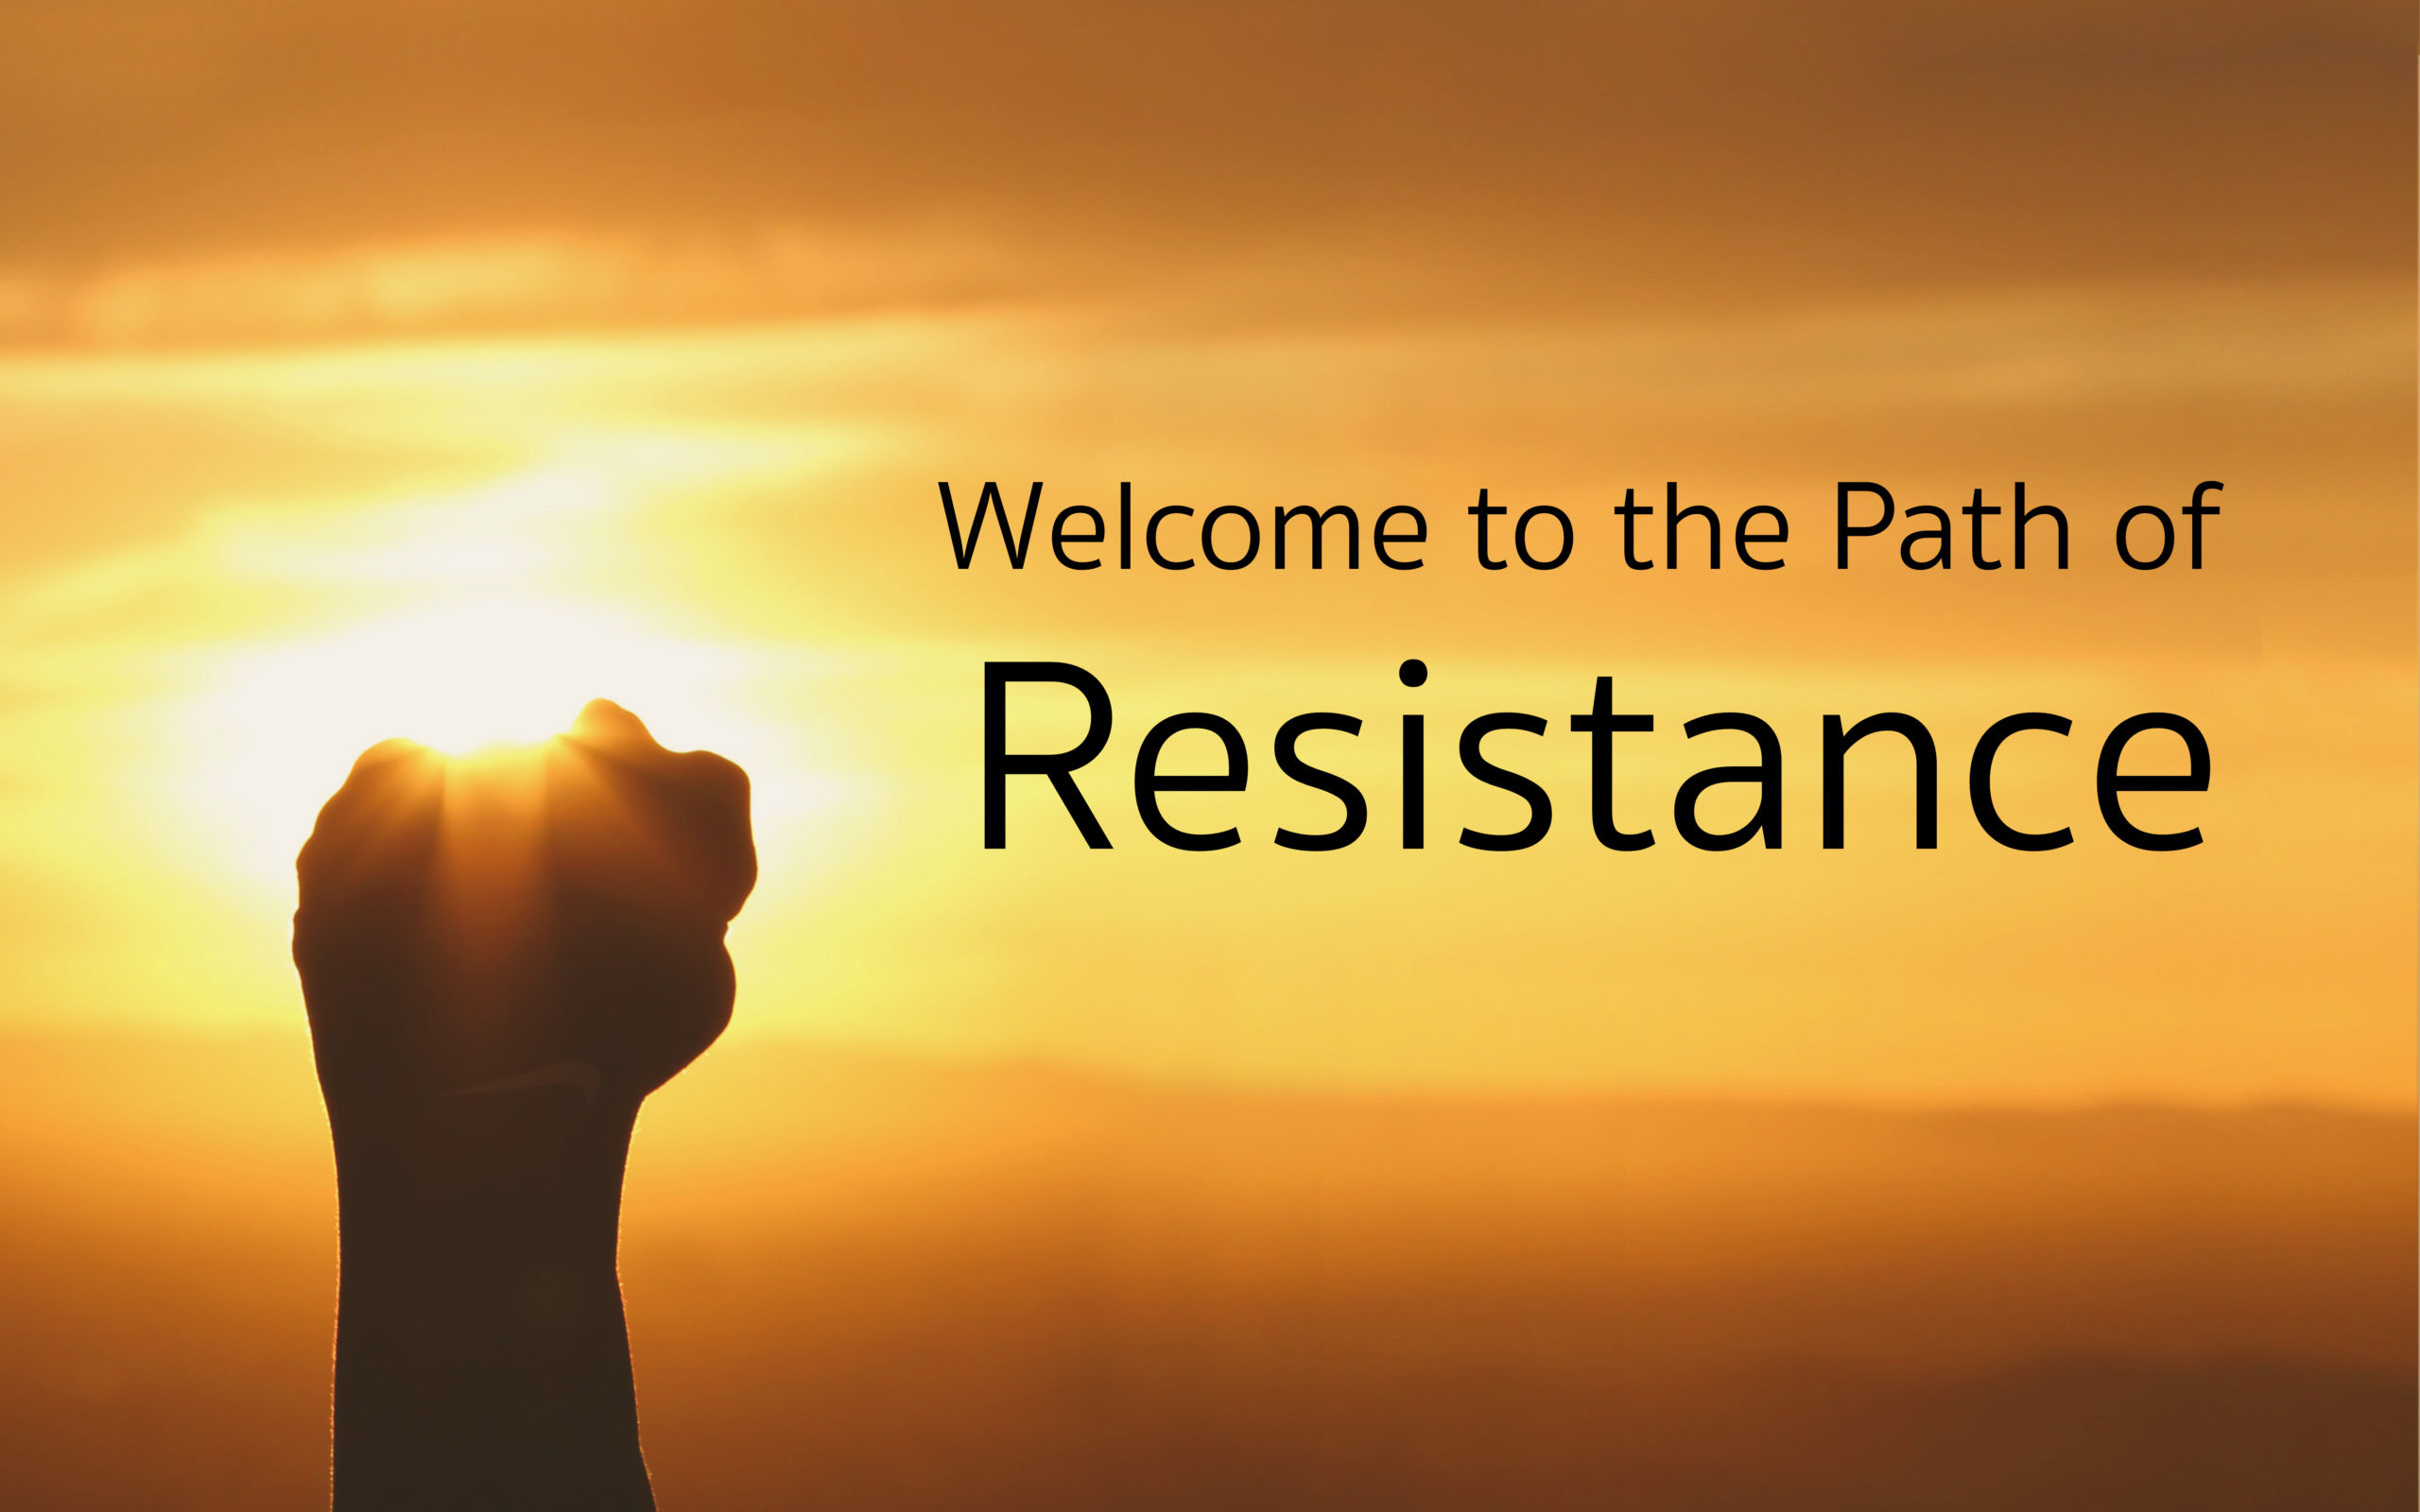 Welcome to the Path of Resistance